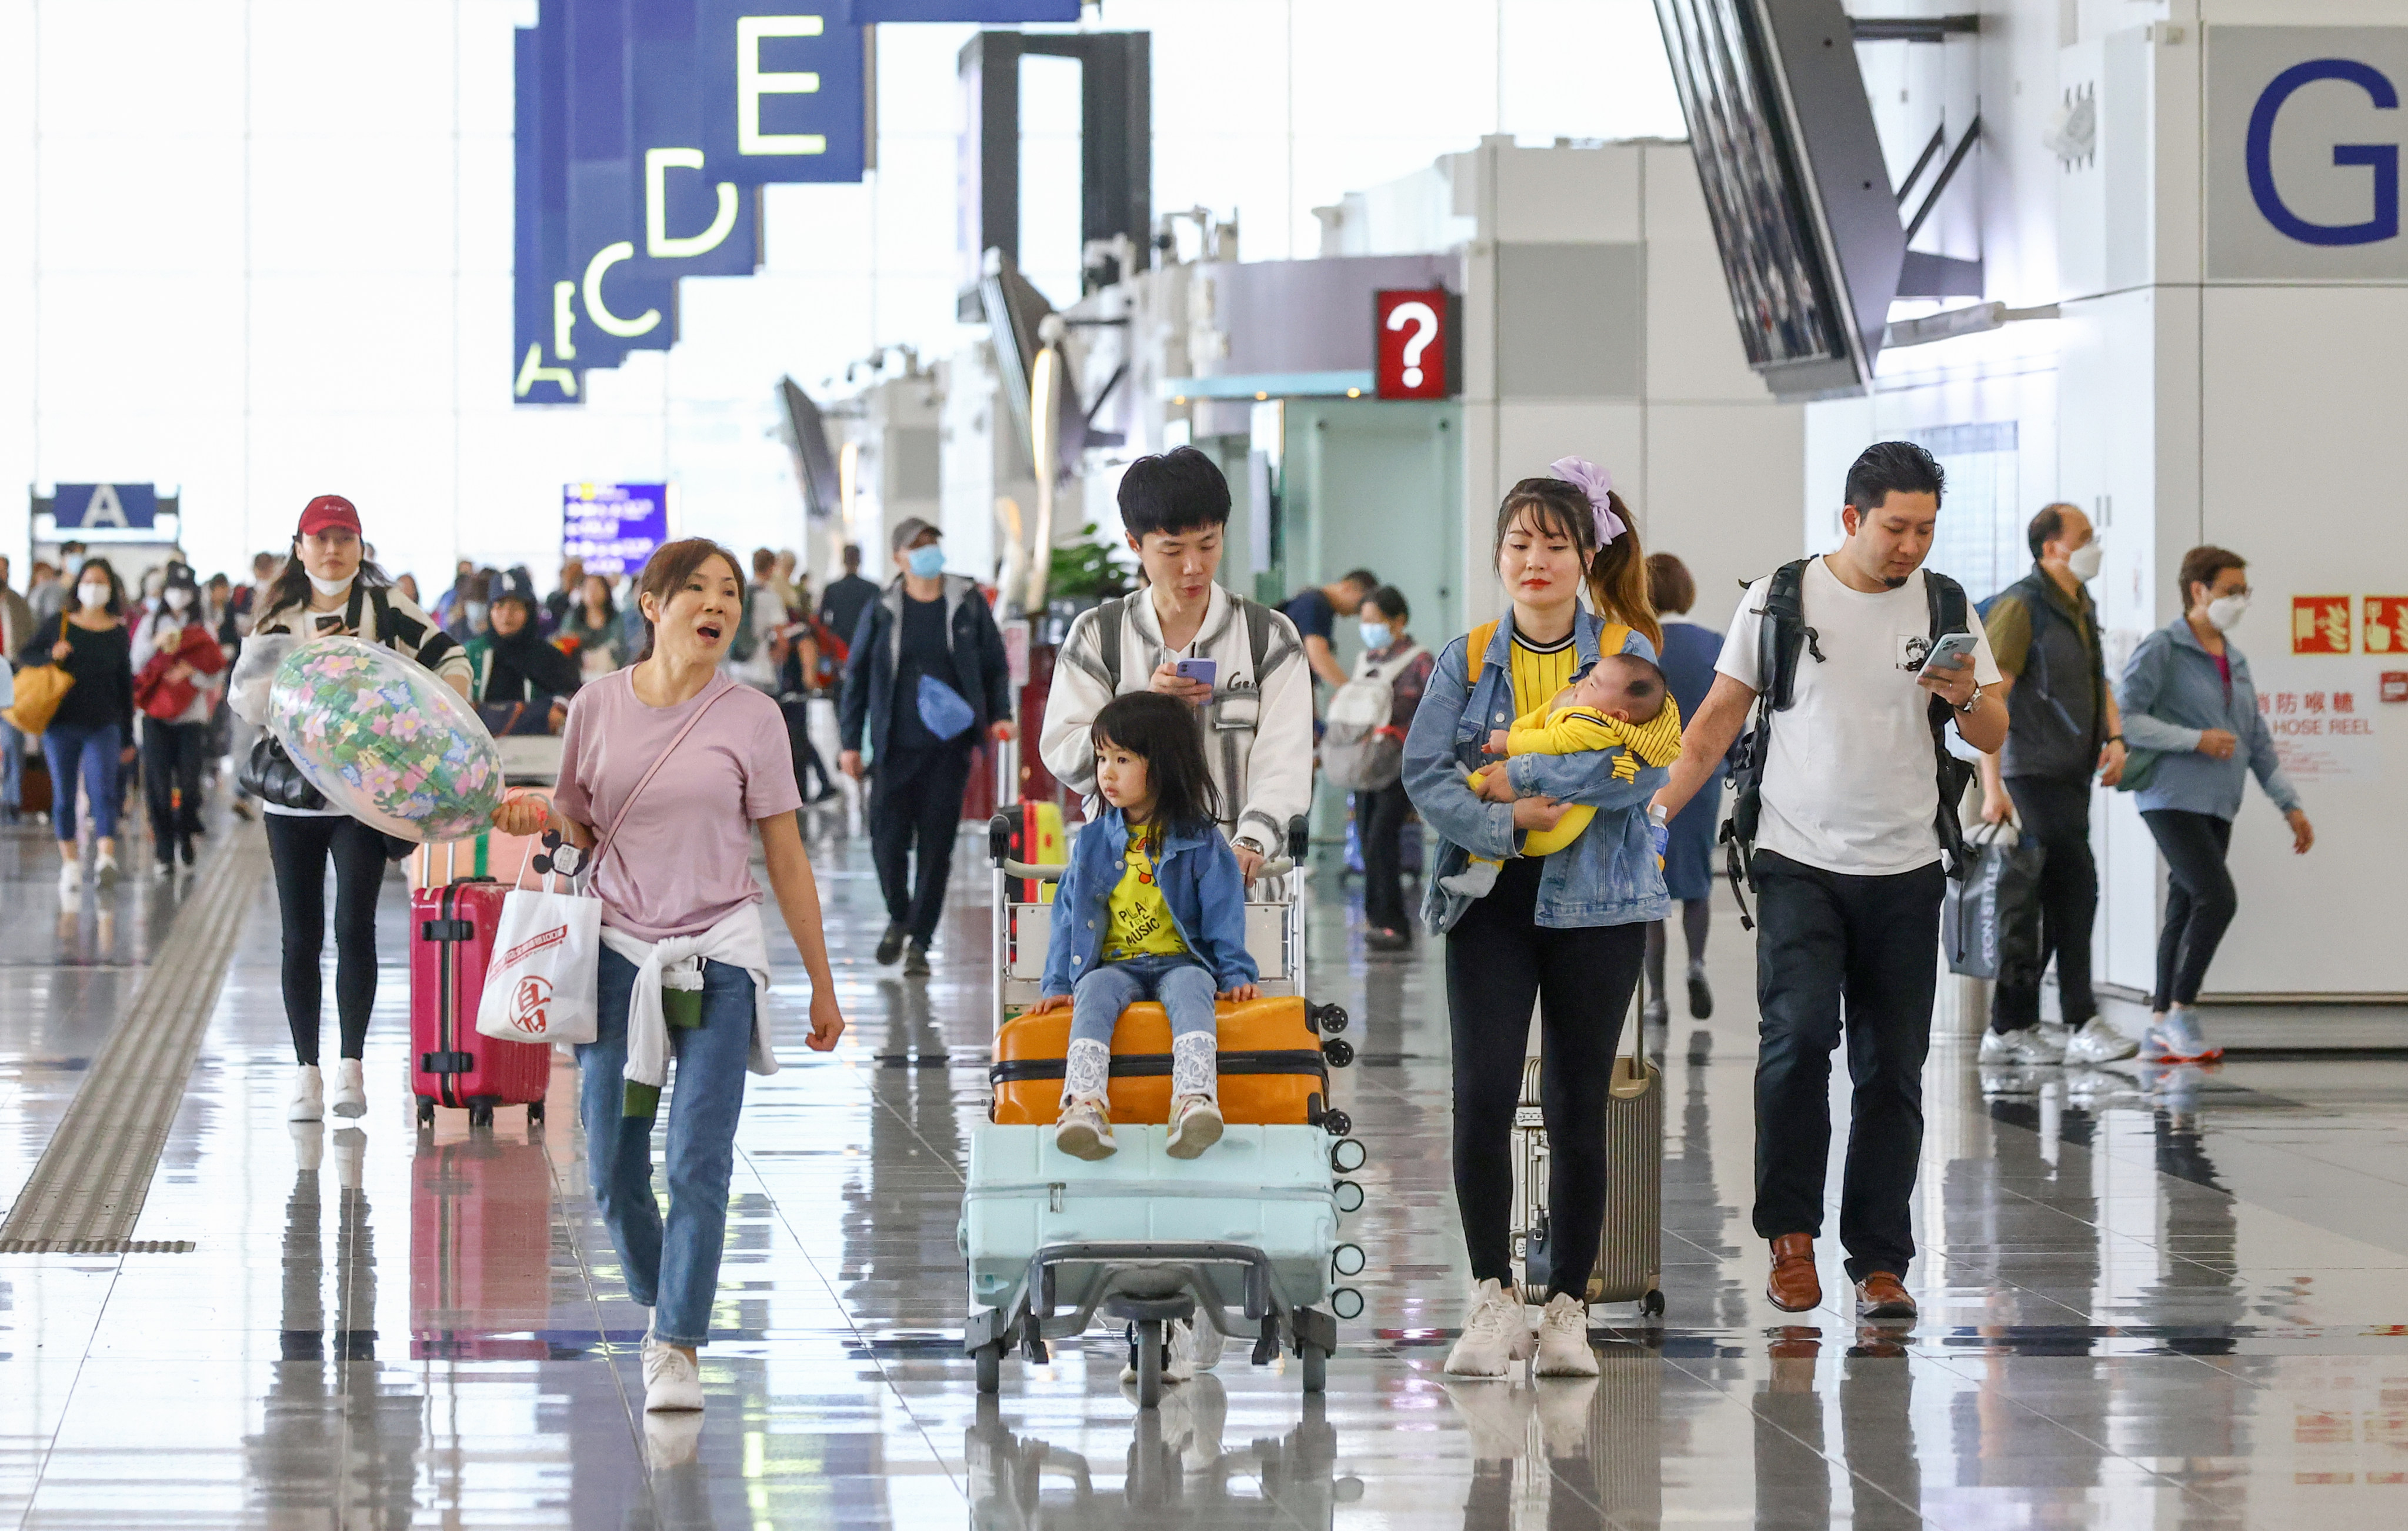 Hong Kong’s airport handled 3.1 million passengers in April, about 24 times more than the same month last year, but still only 48 per cent of pre-pandemic levels. Photo: Dickson Lee